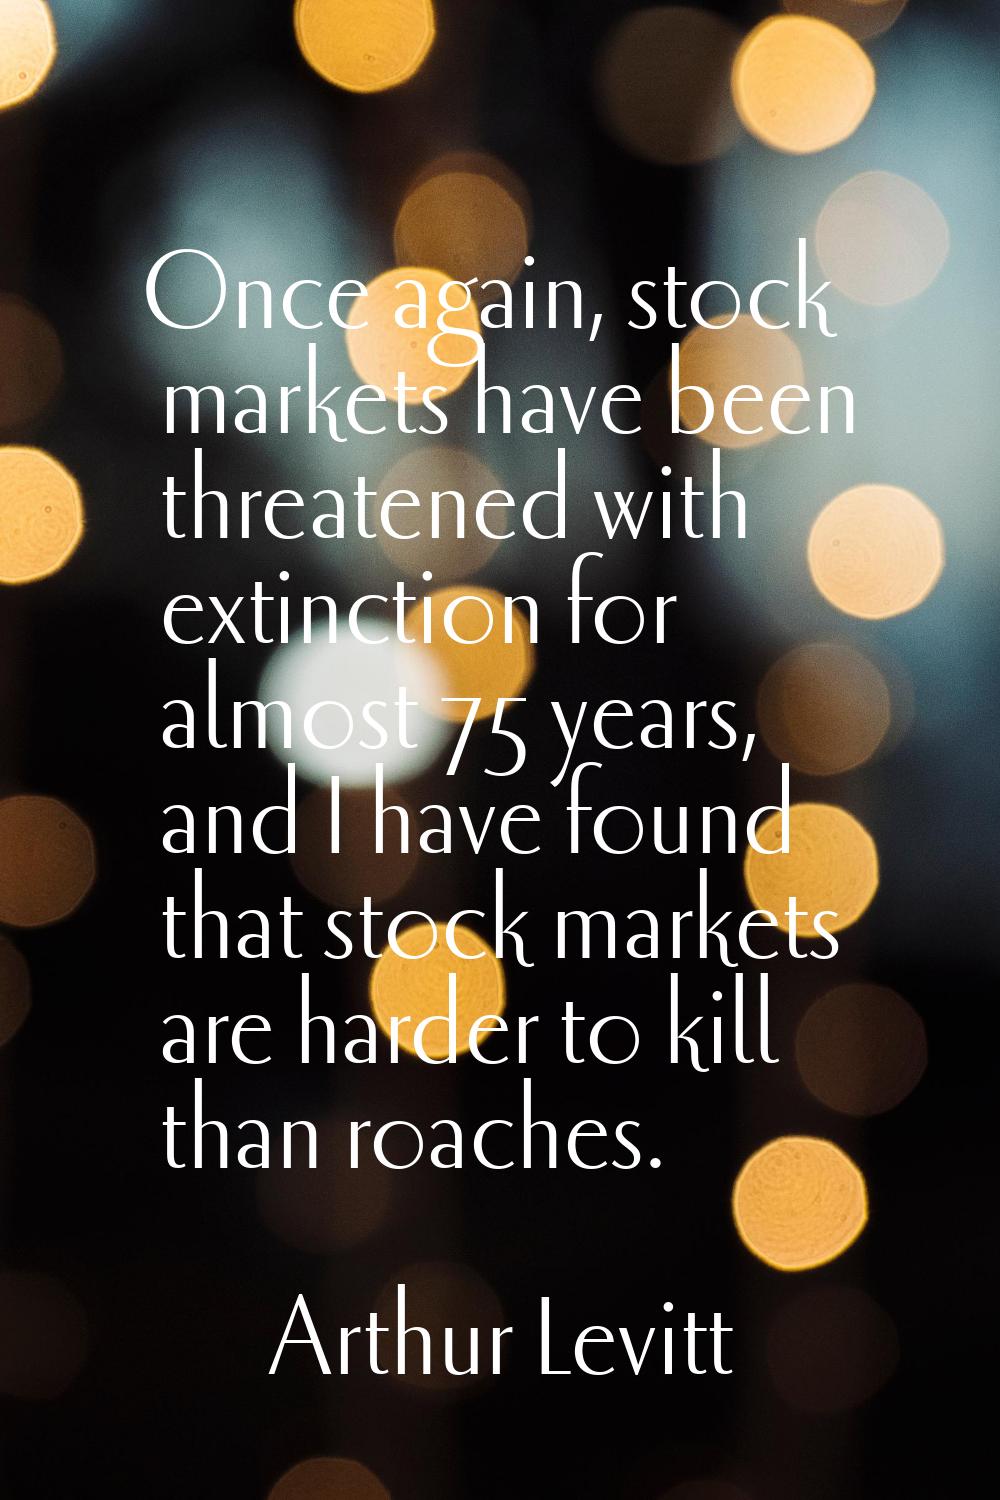 Once again, stock markets have been threatened with extinction for almost 75 years, and I have foun